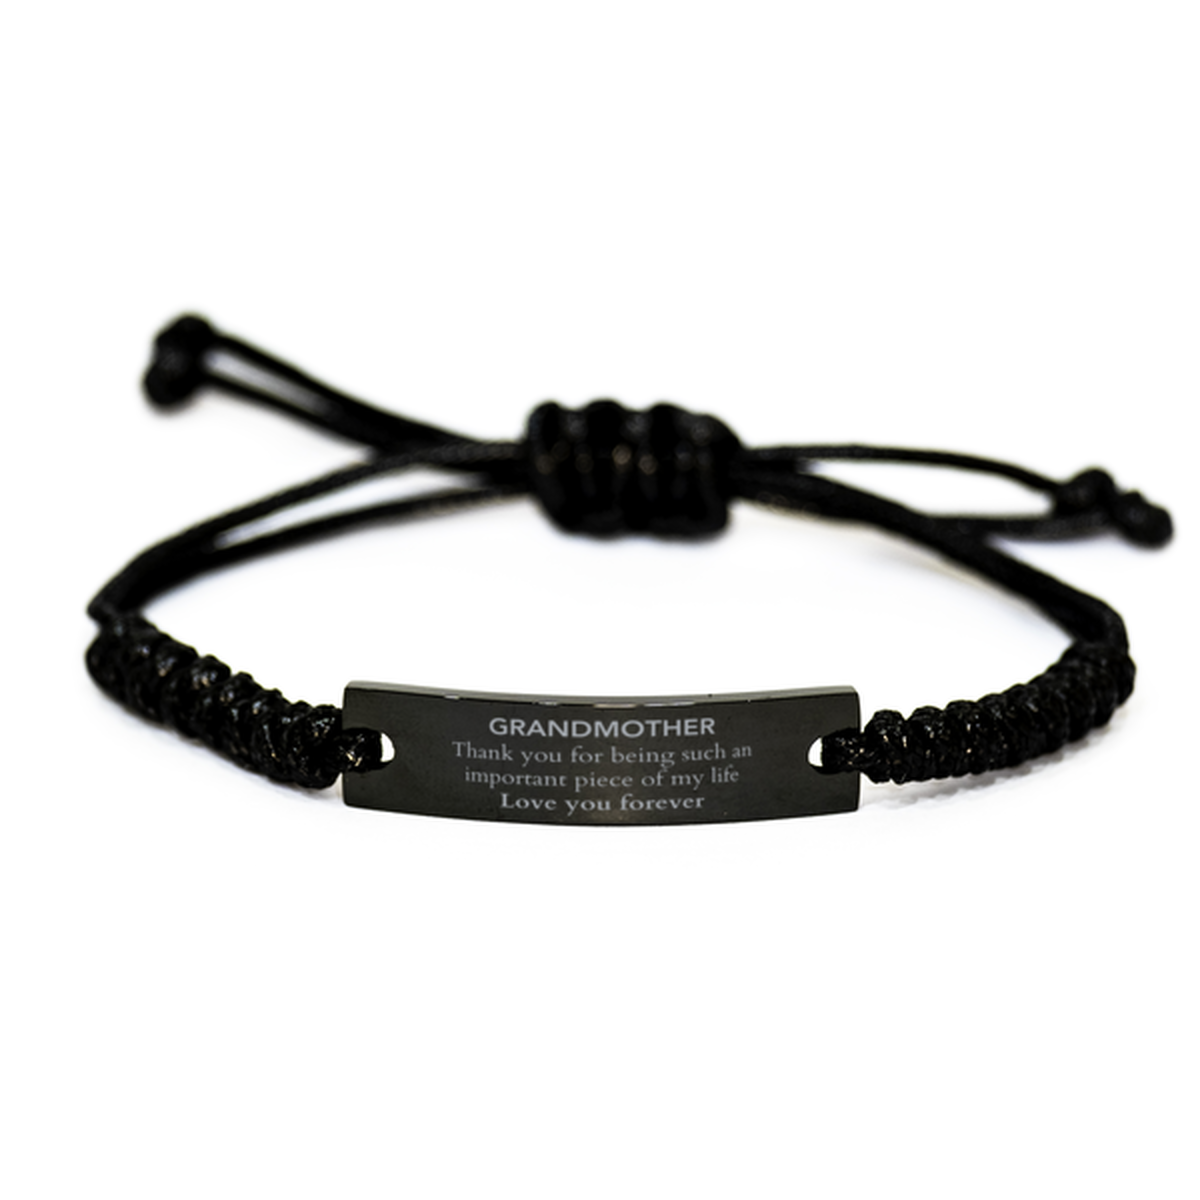 Appropriate Grandmother Black Rope Bracelet Epic Birthday Gifts for Grandmother Thank you for being such an important piece of my life Grandmother Christmas Mothers Fathers Day